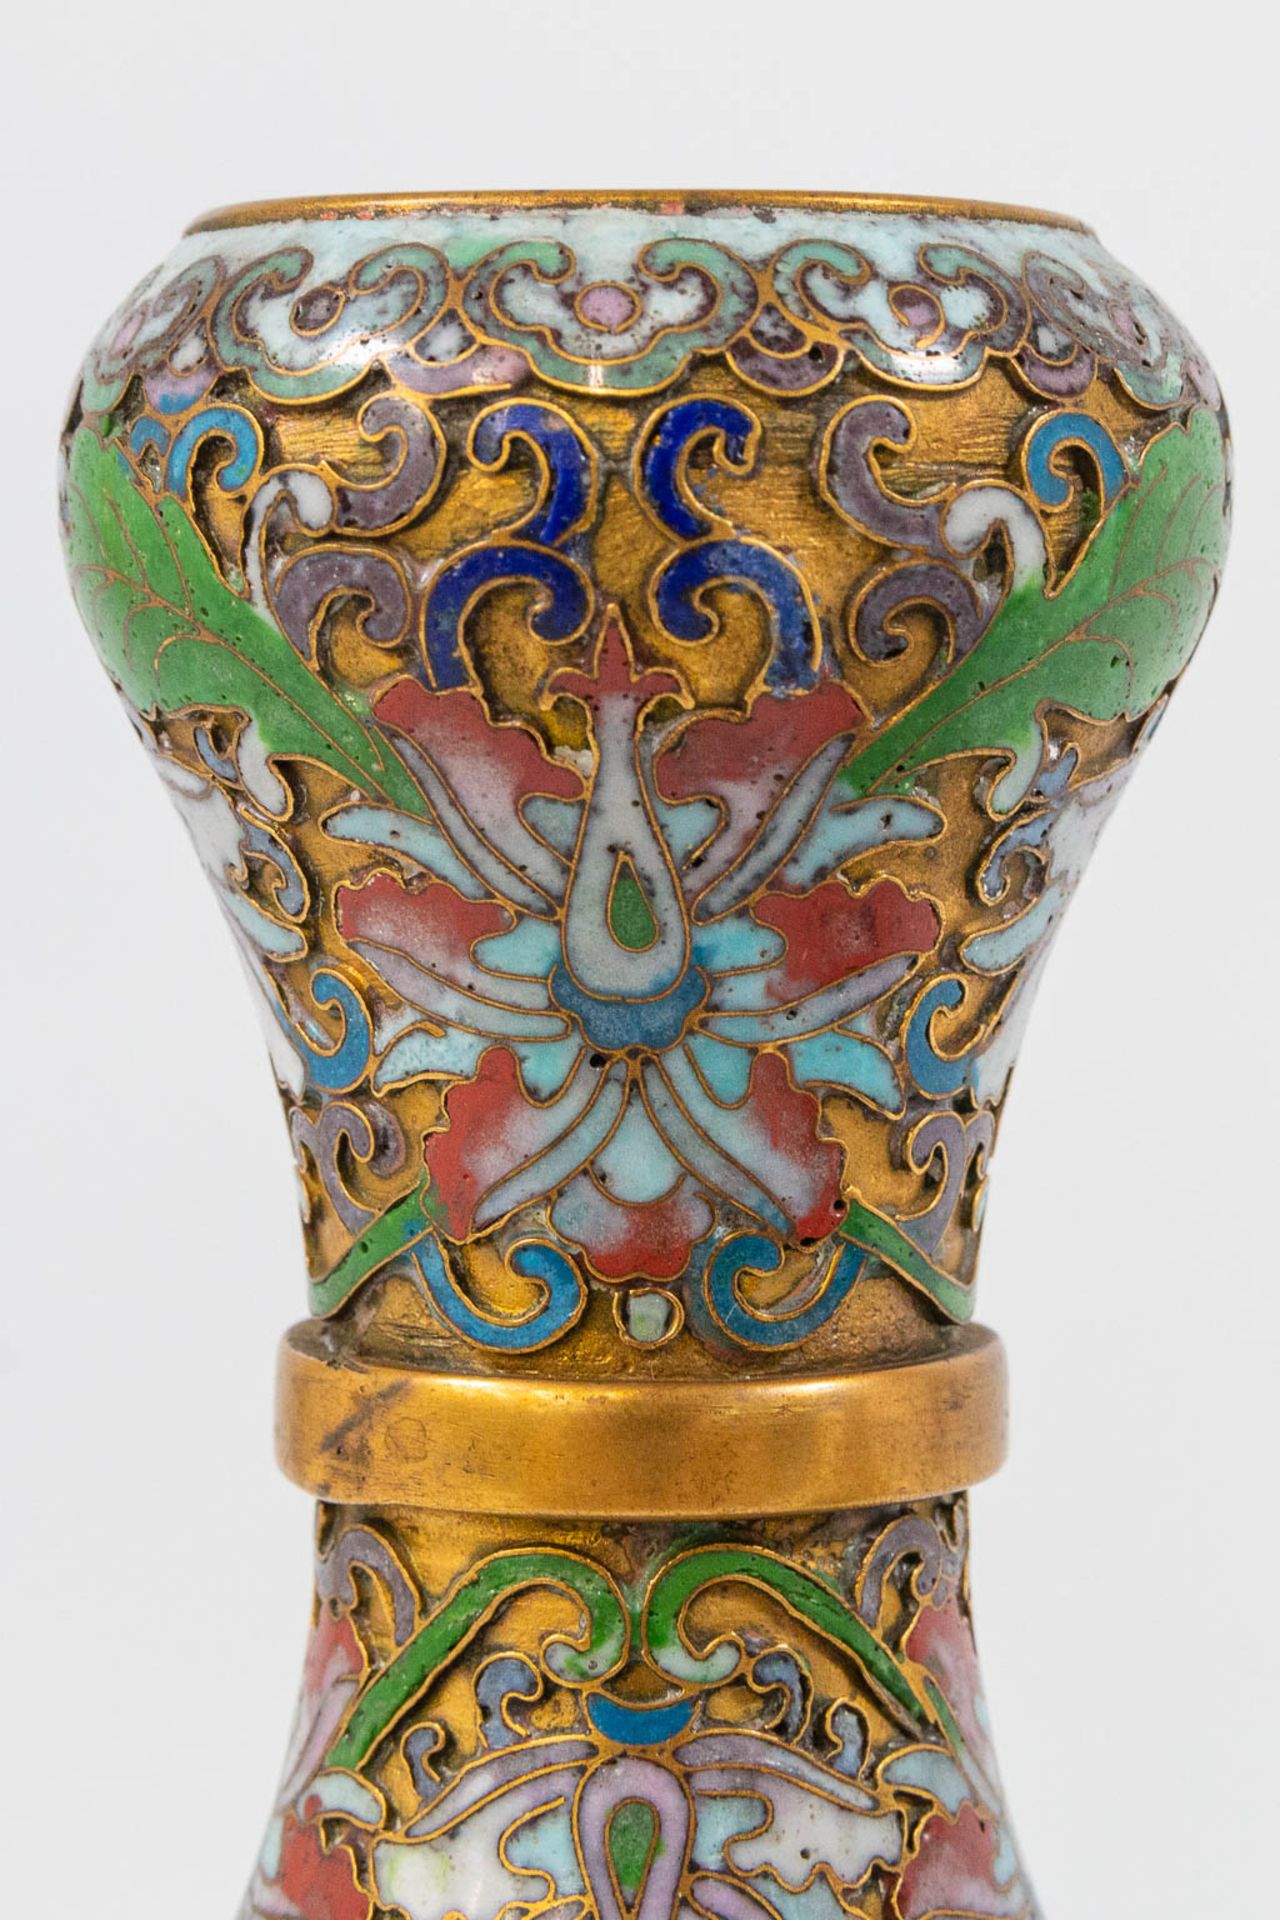 A pair of openworked Cloisonné vases, made of Bronze and enamel. - Image 13 of 17